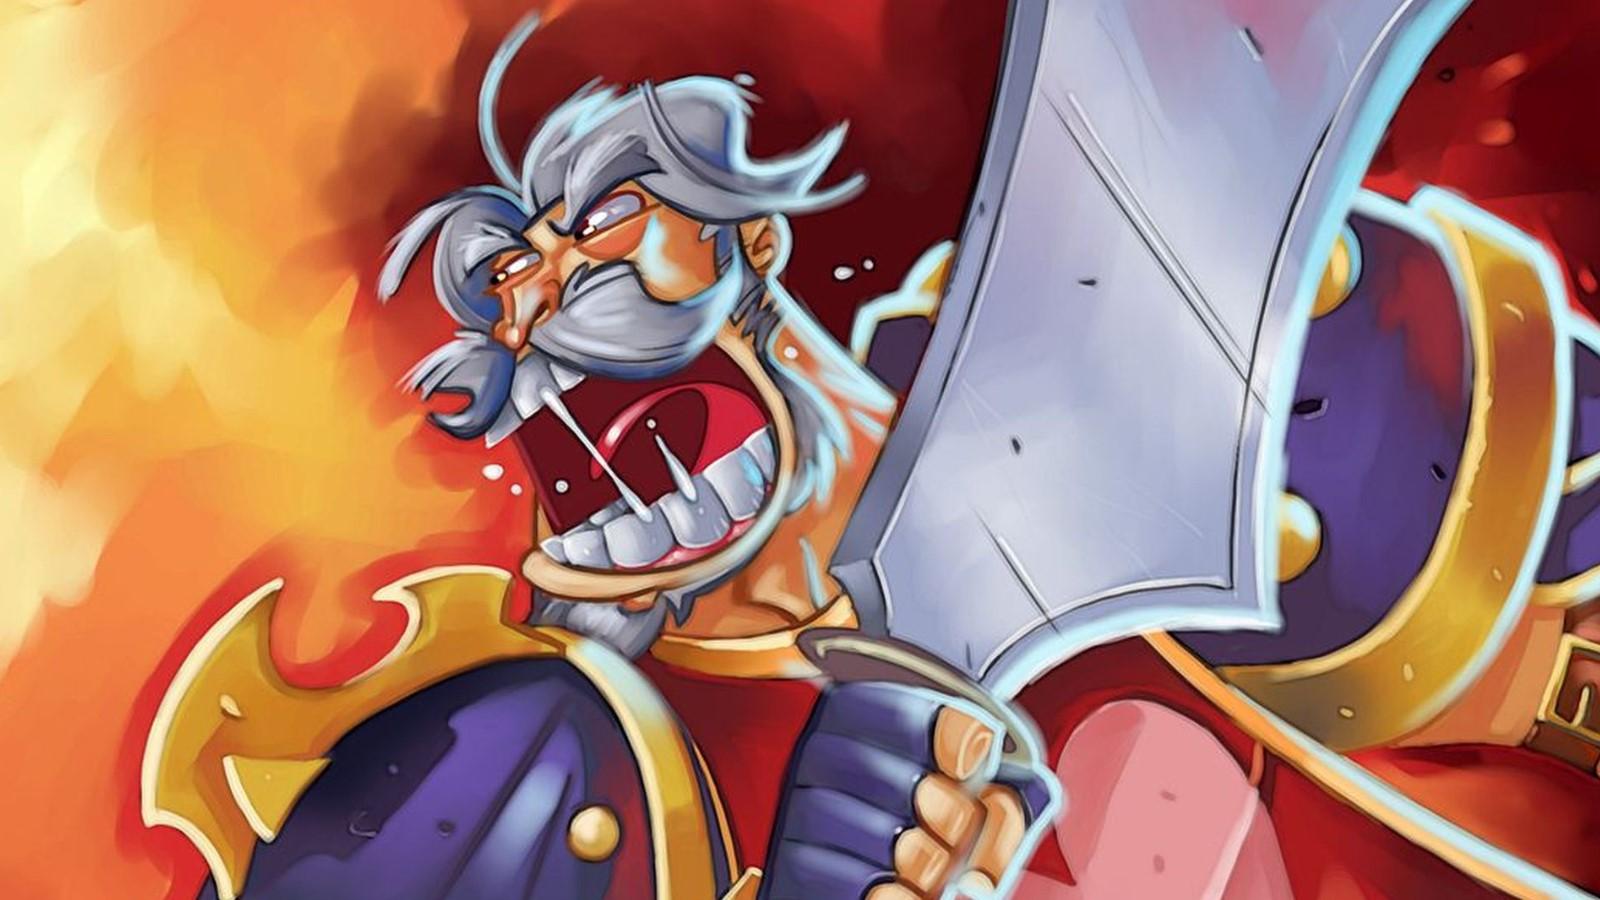 Leeroy Jenkins screams with a sword in his hand